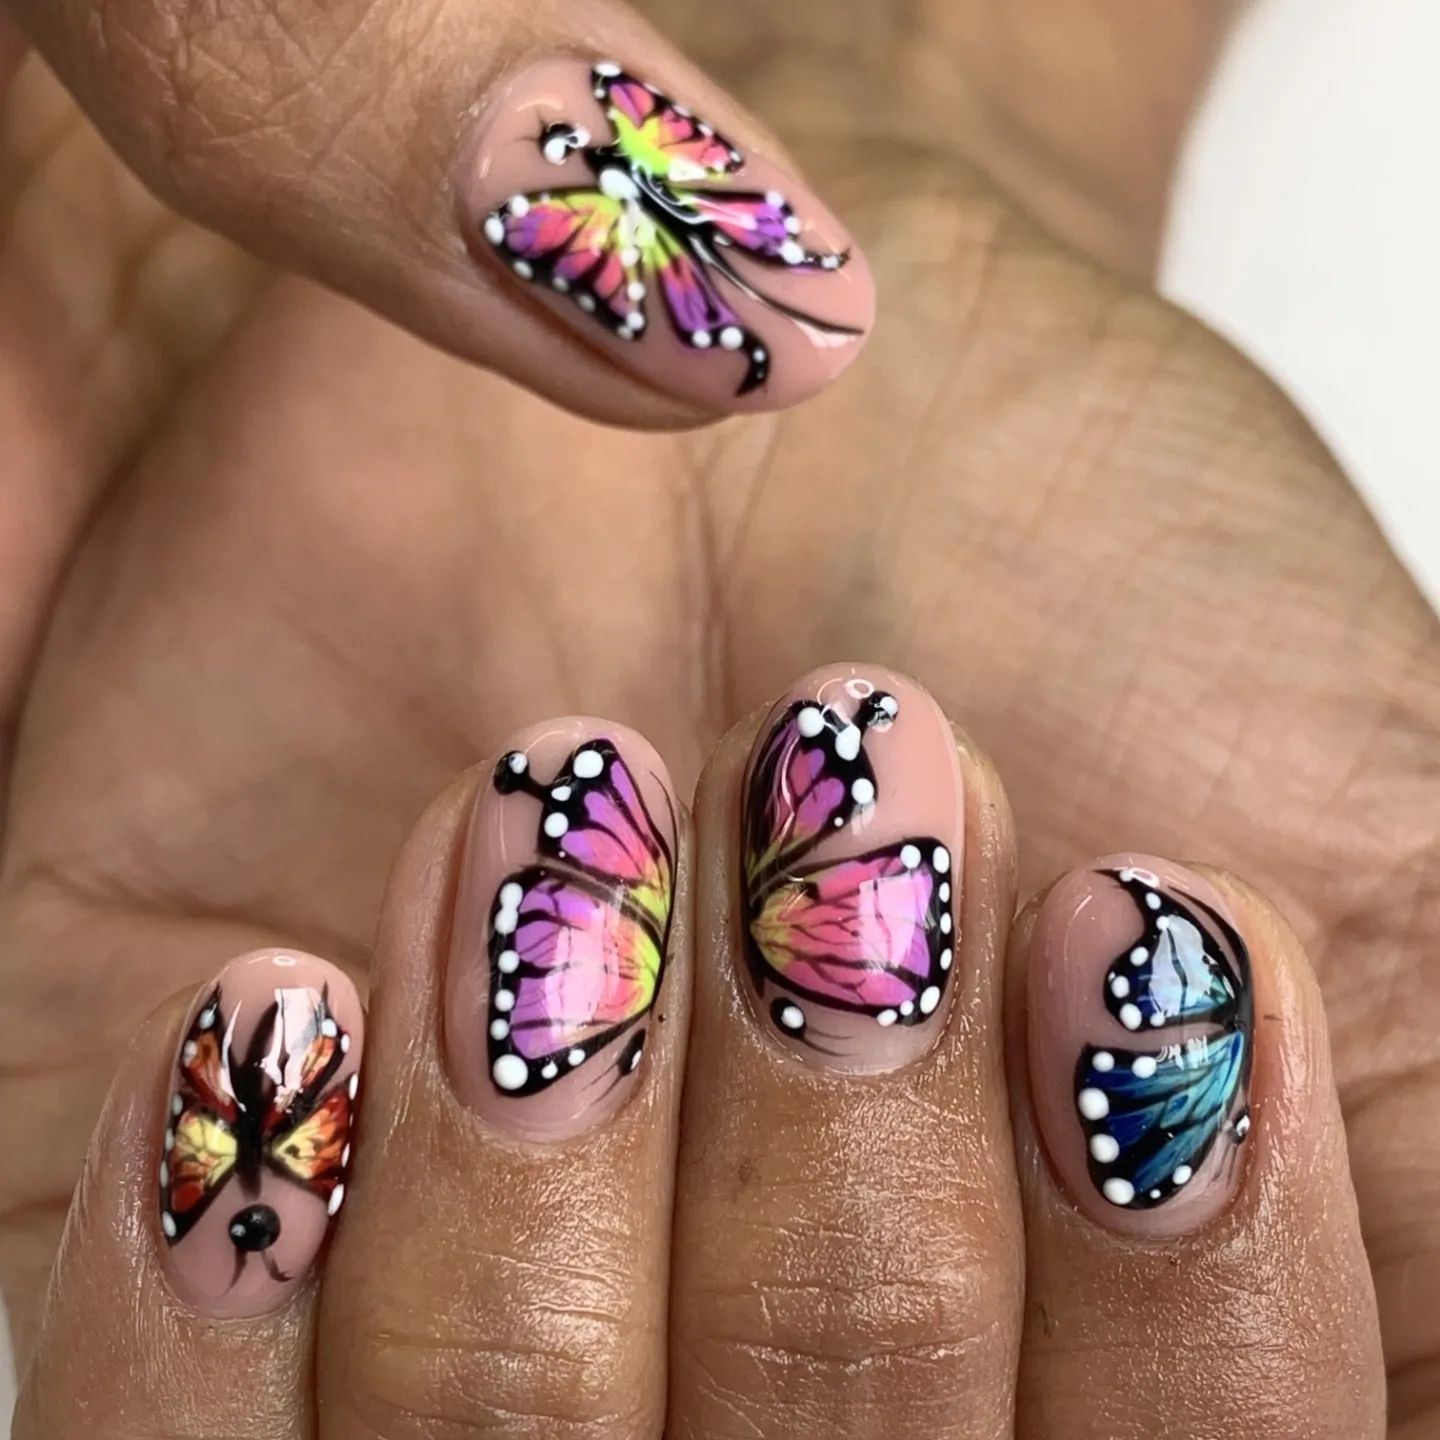 Butterflies are beautiful animals that come in all different colors. You can show their perfection on your nails like the one above.